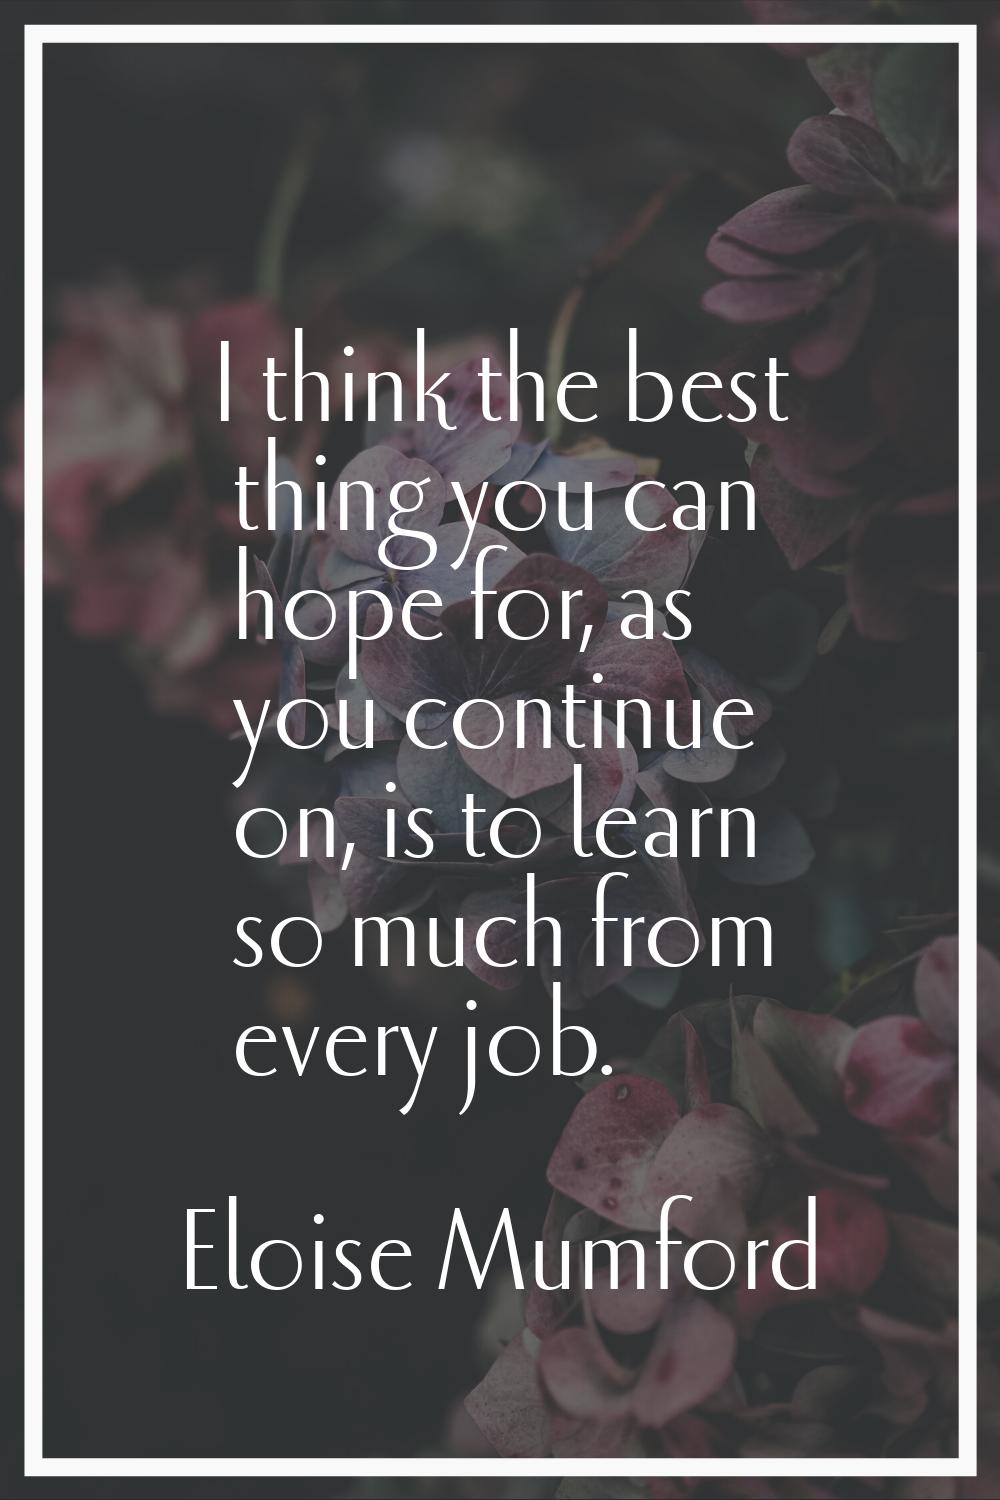 I think the best thing you can hope for, as you continue on, is to learn so much from every job.